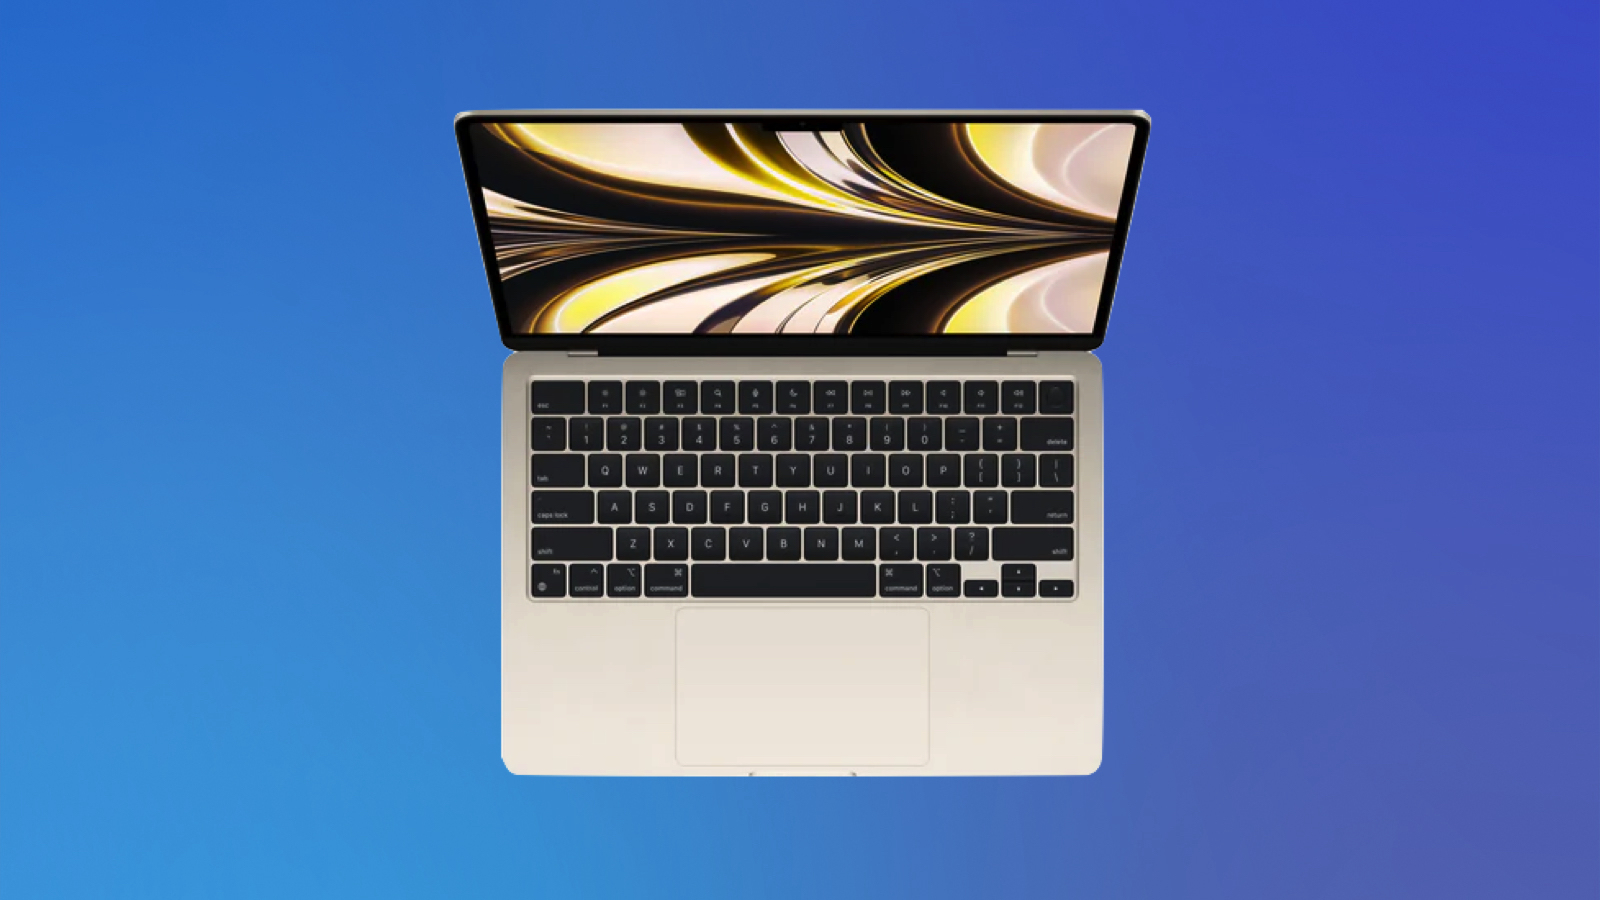 Deals: Apple’s M2 MacBook Air Available for Record Low Price of $1,099 on Amazon ($100 Off) [Updated]